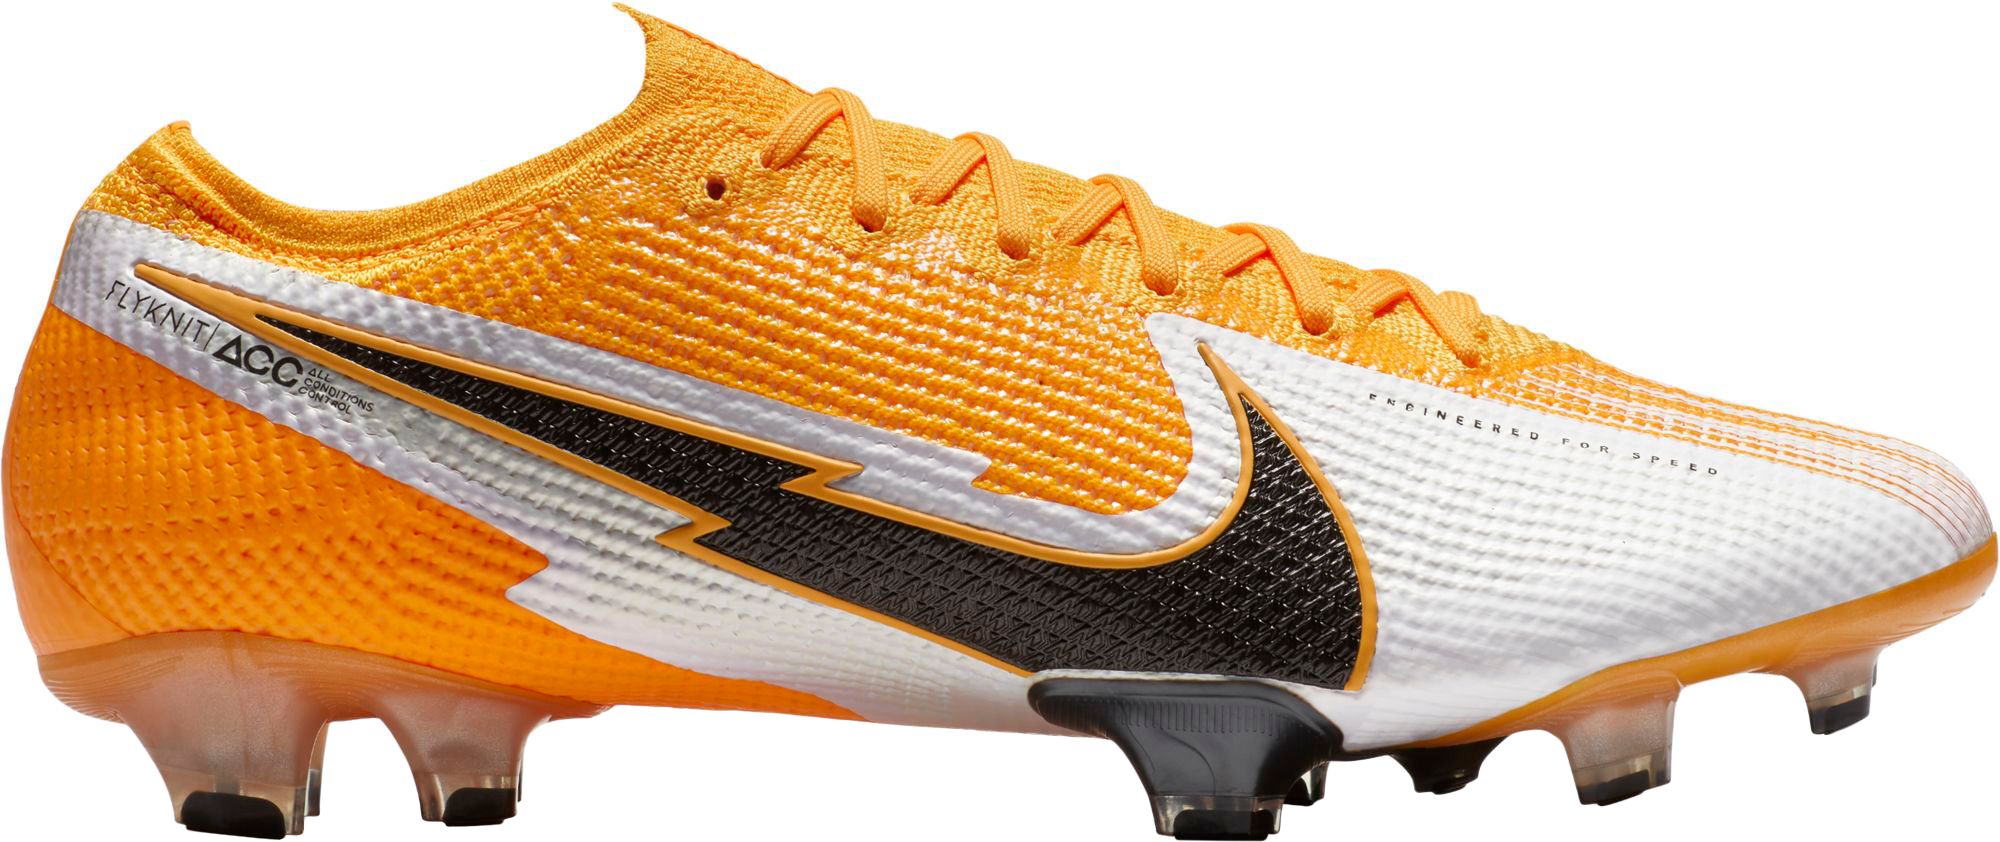 yellow nike cleats soccer